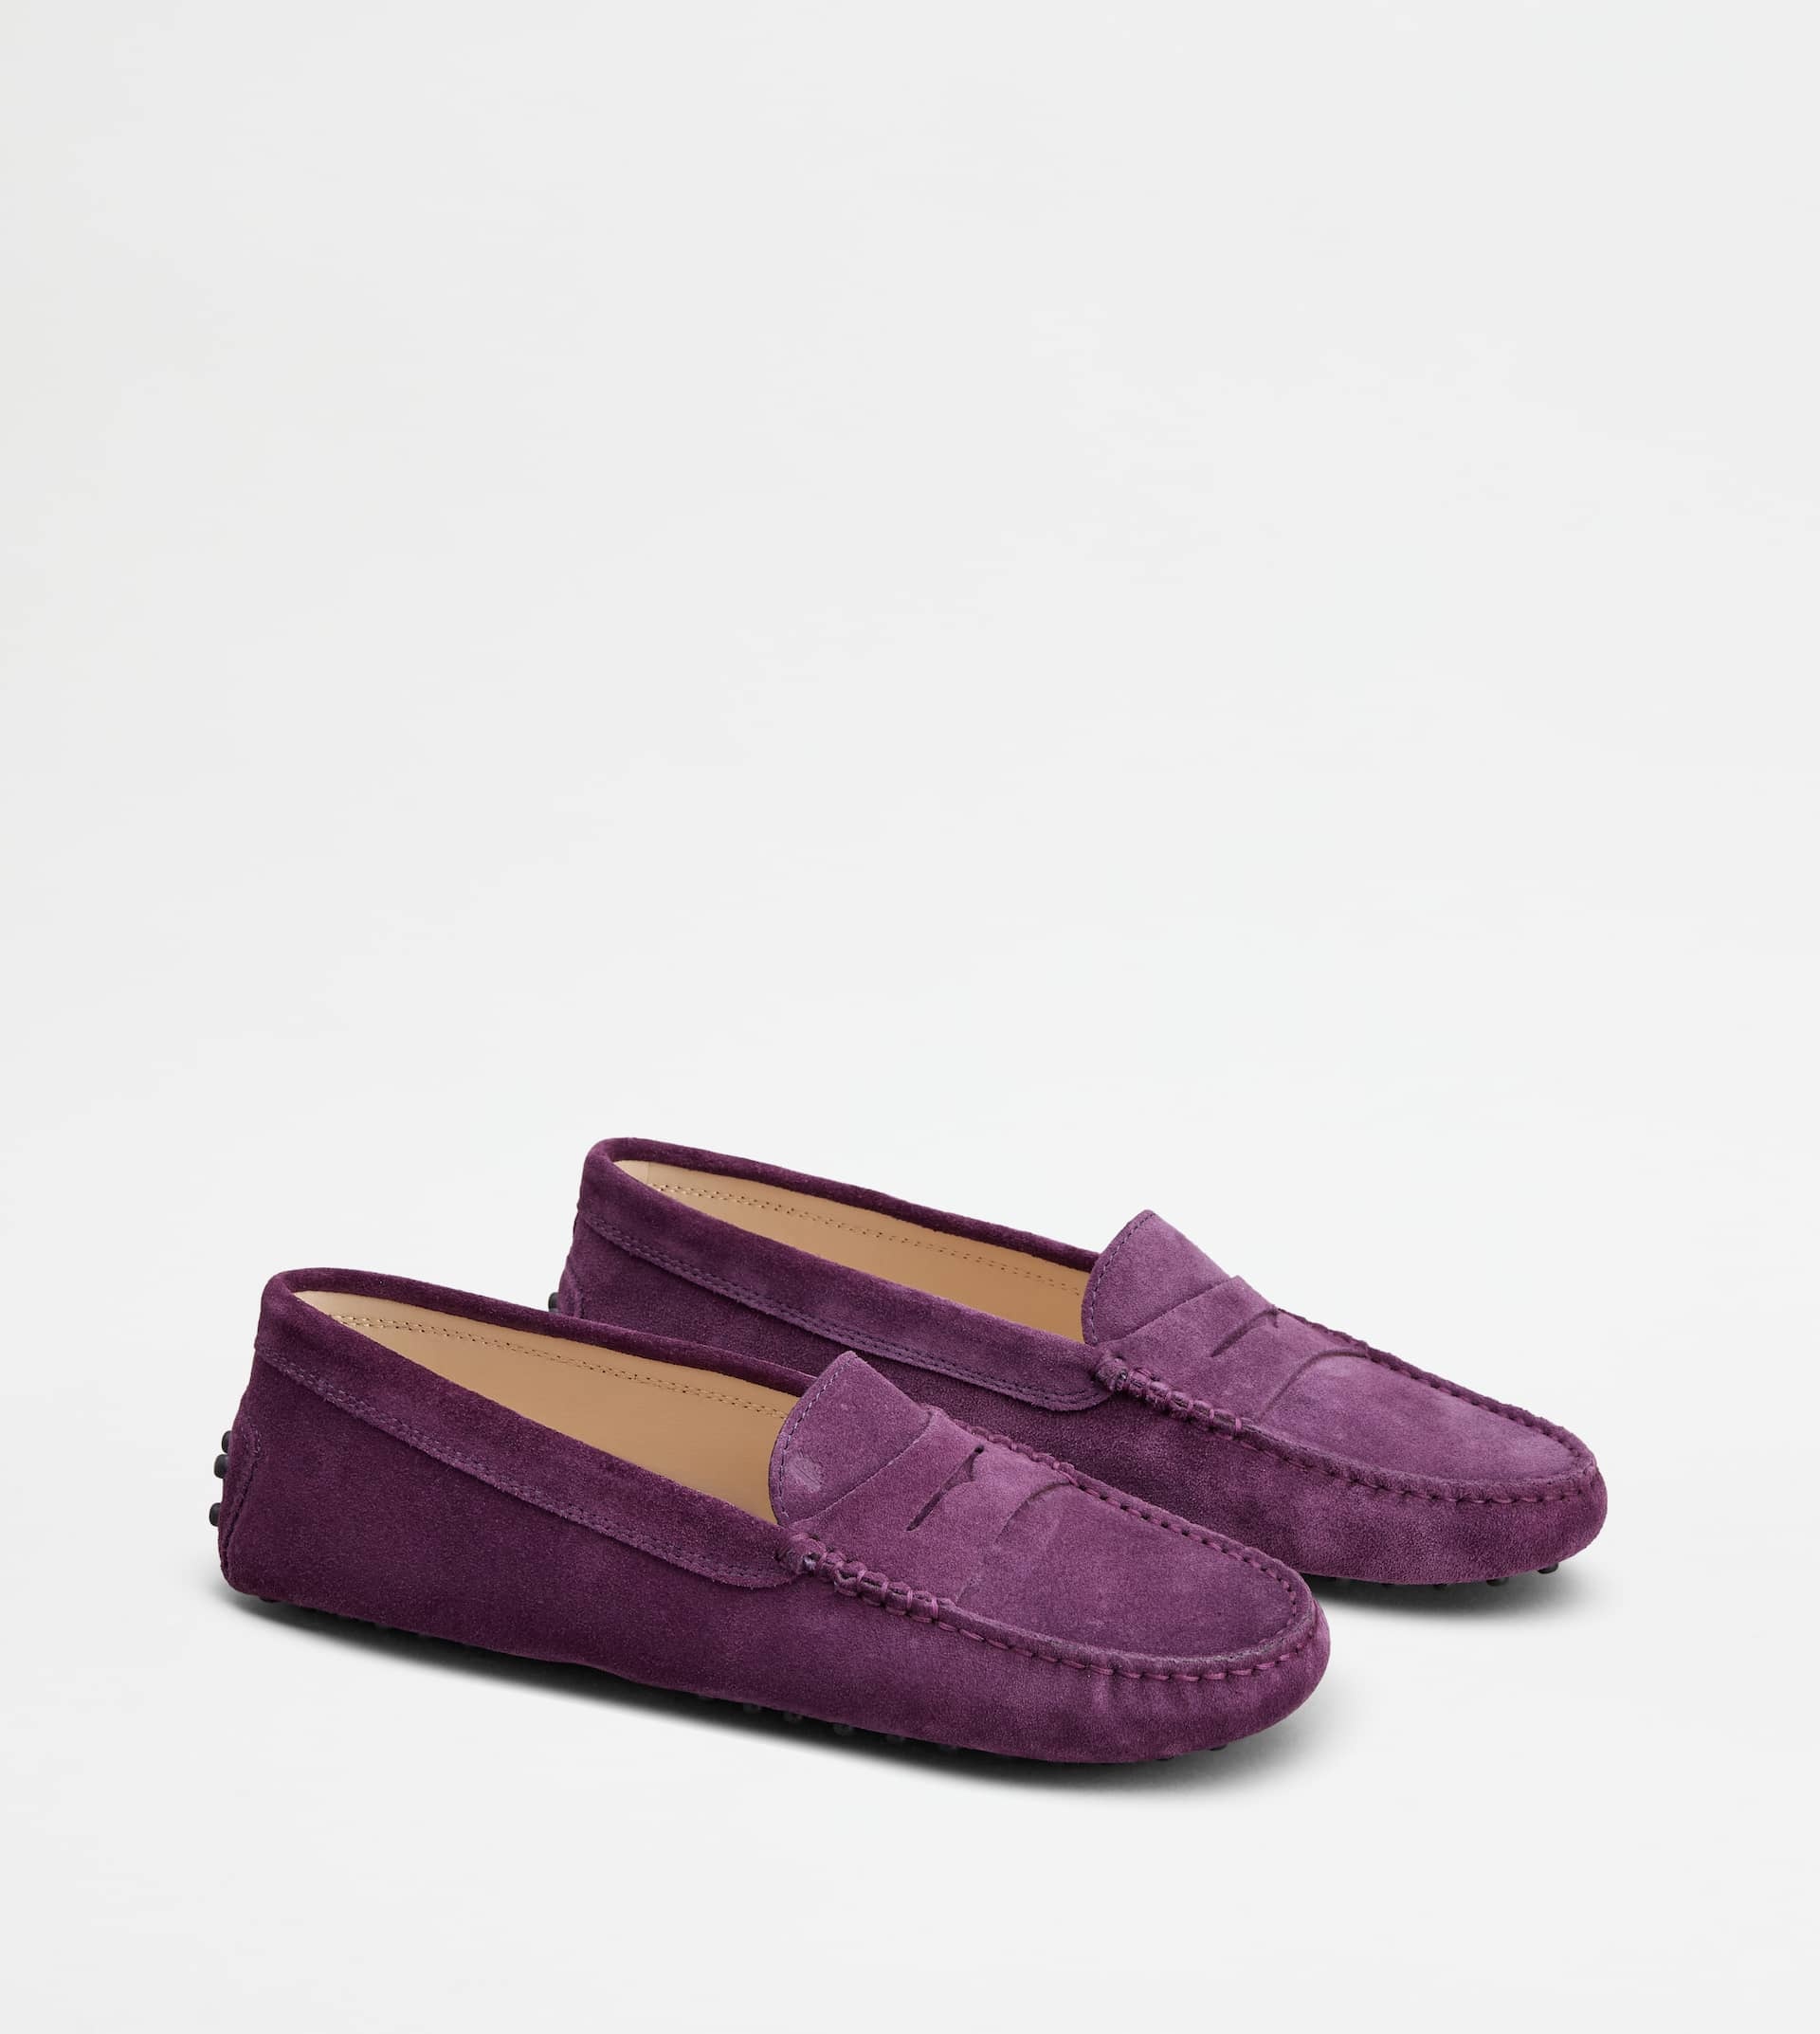 GOMMINO DRIVING SHOES IN SUEDE - VIOLET - 3